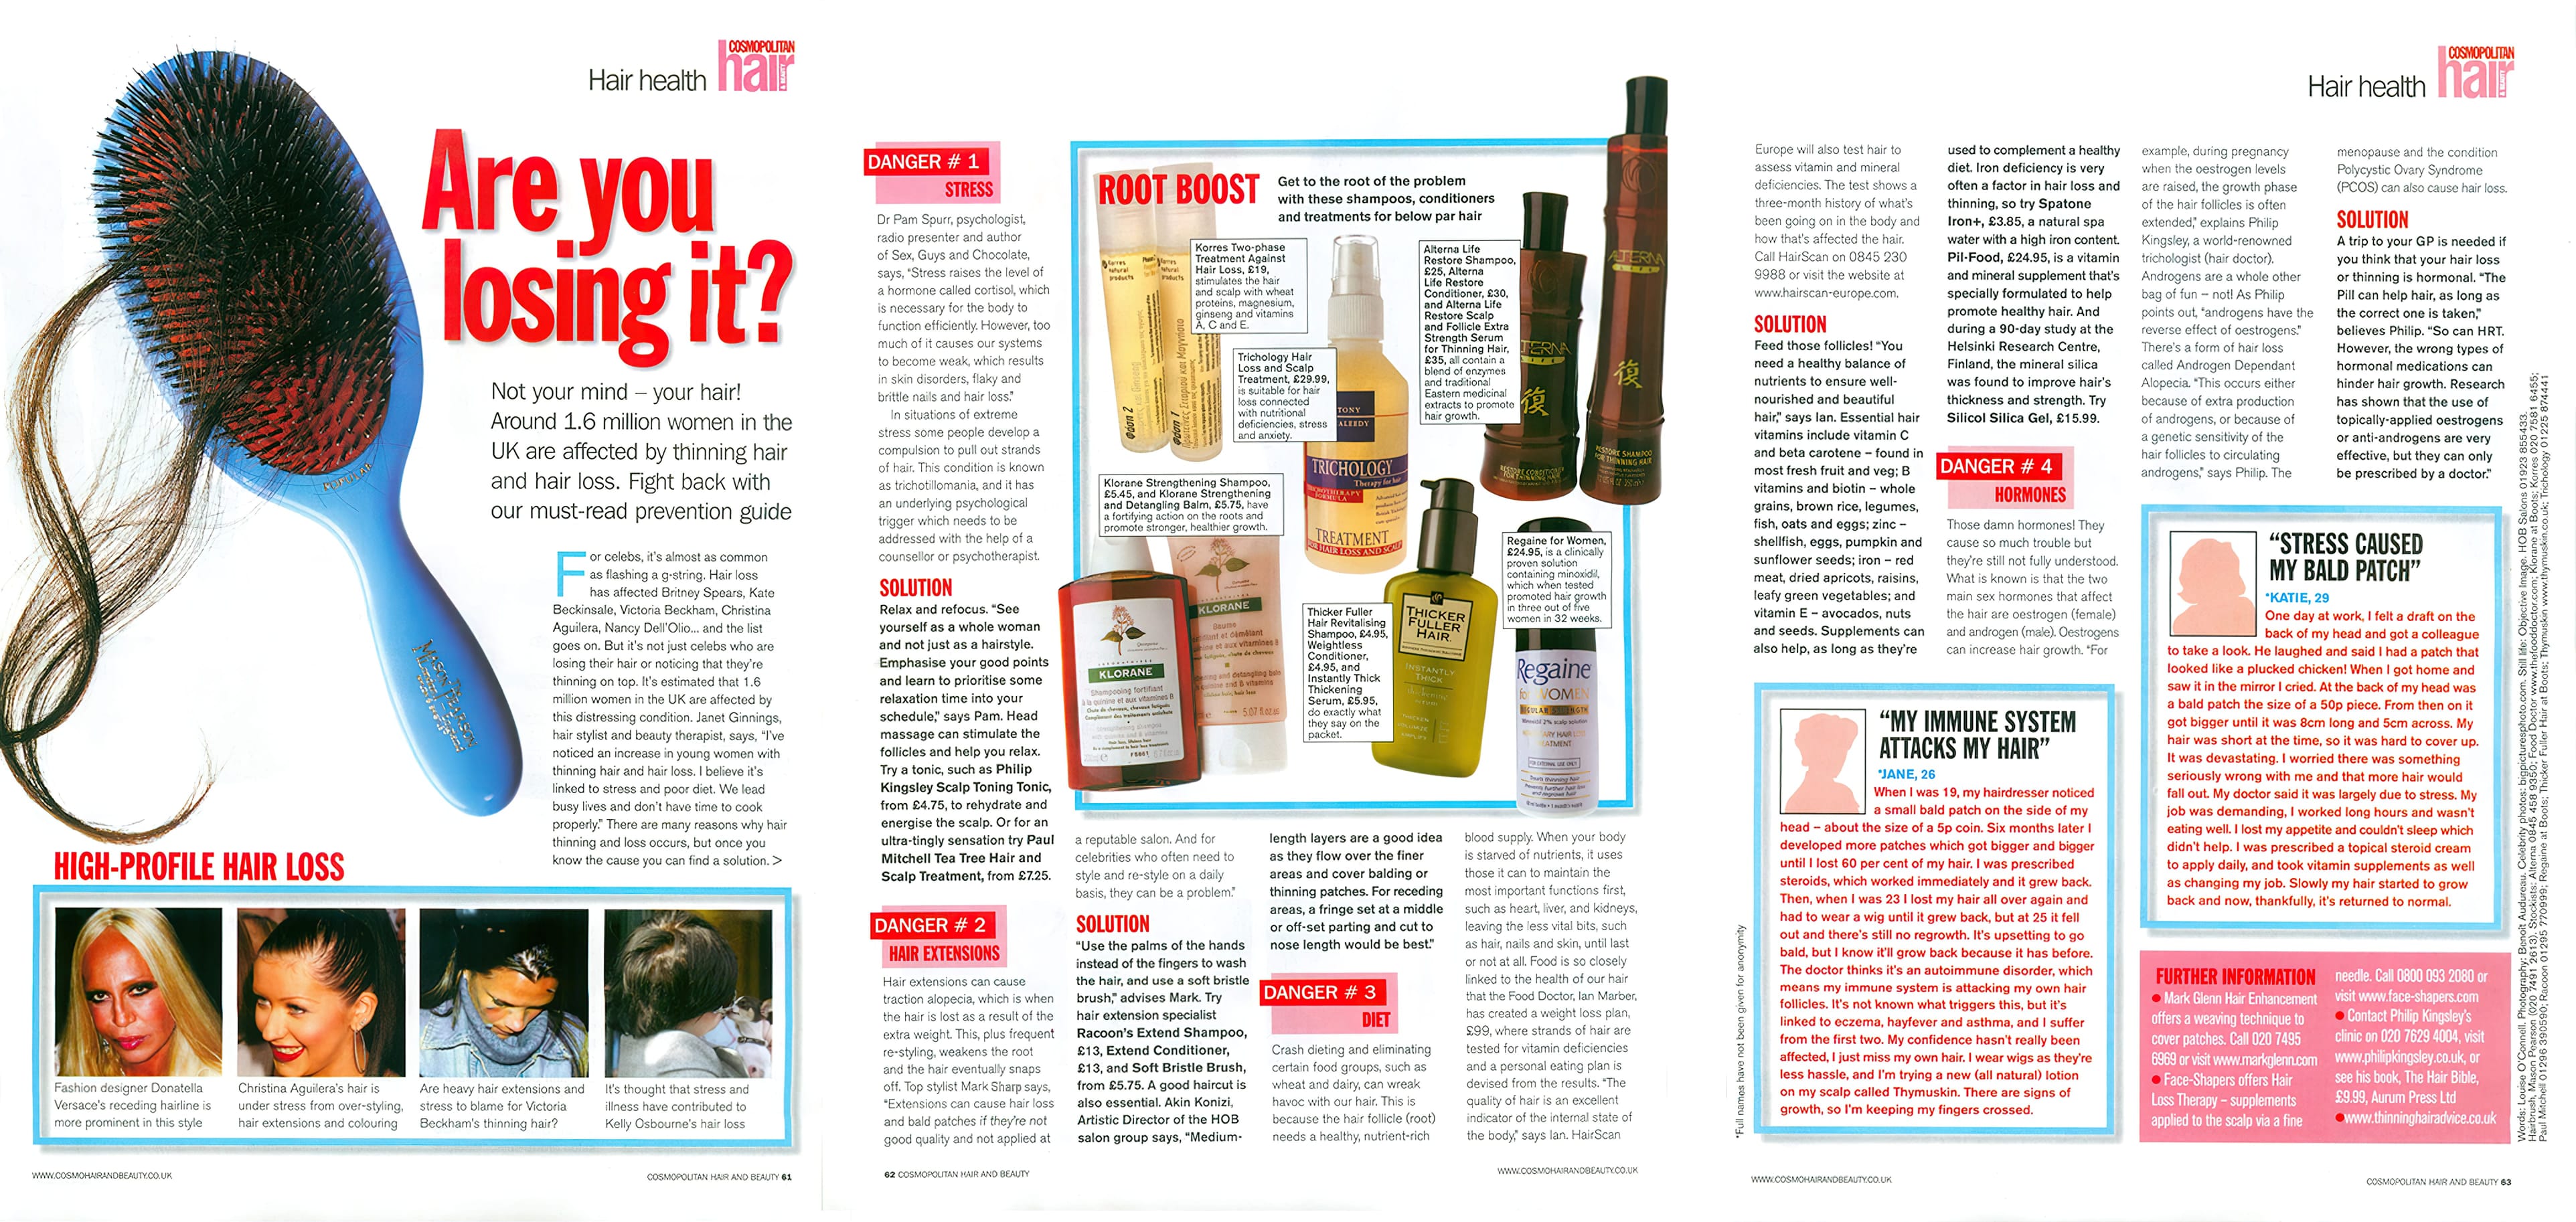 Cosmopolitan - 'Are you losing it?' - women's hair loss feature